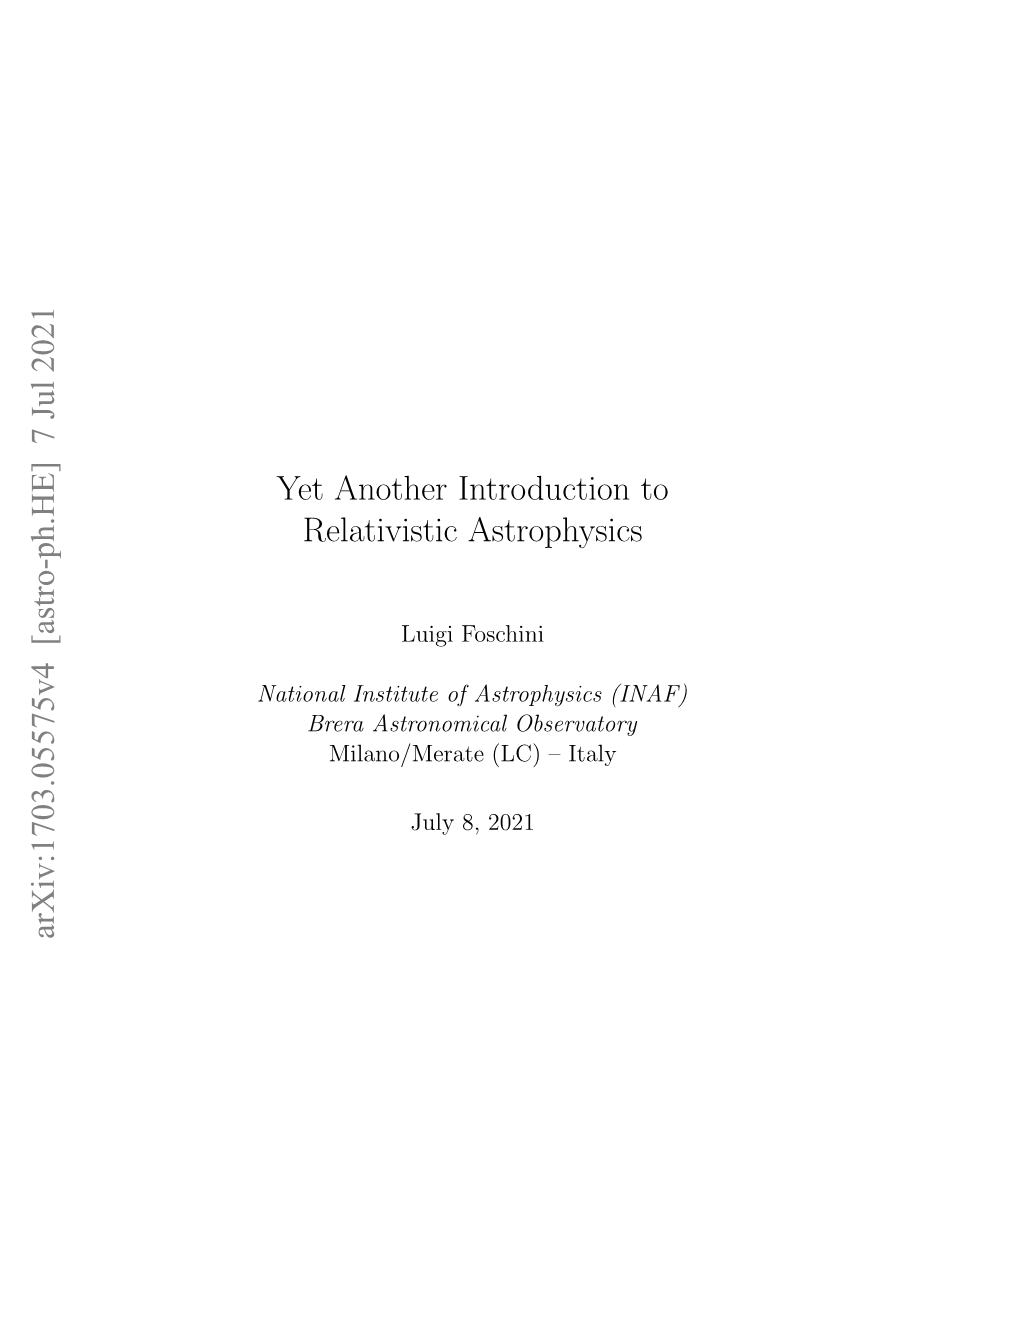 Yet Another Introduction to Relativistic Astrophysics